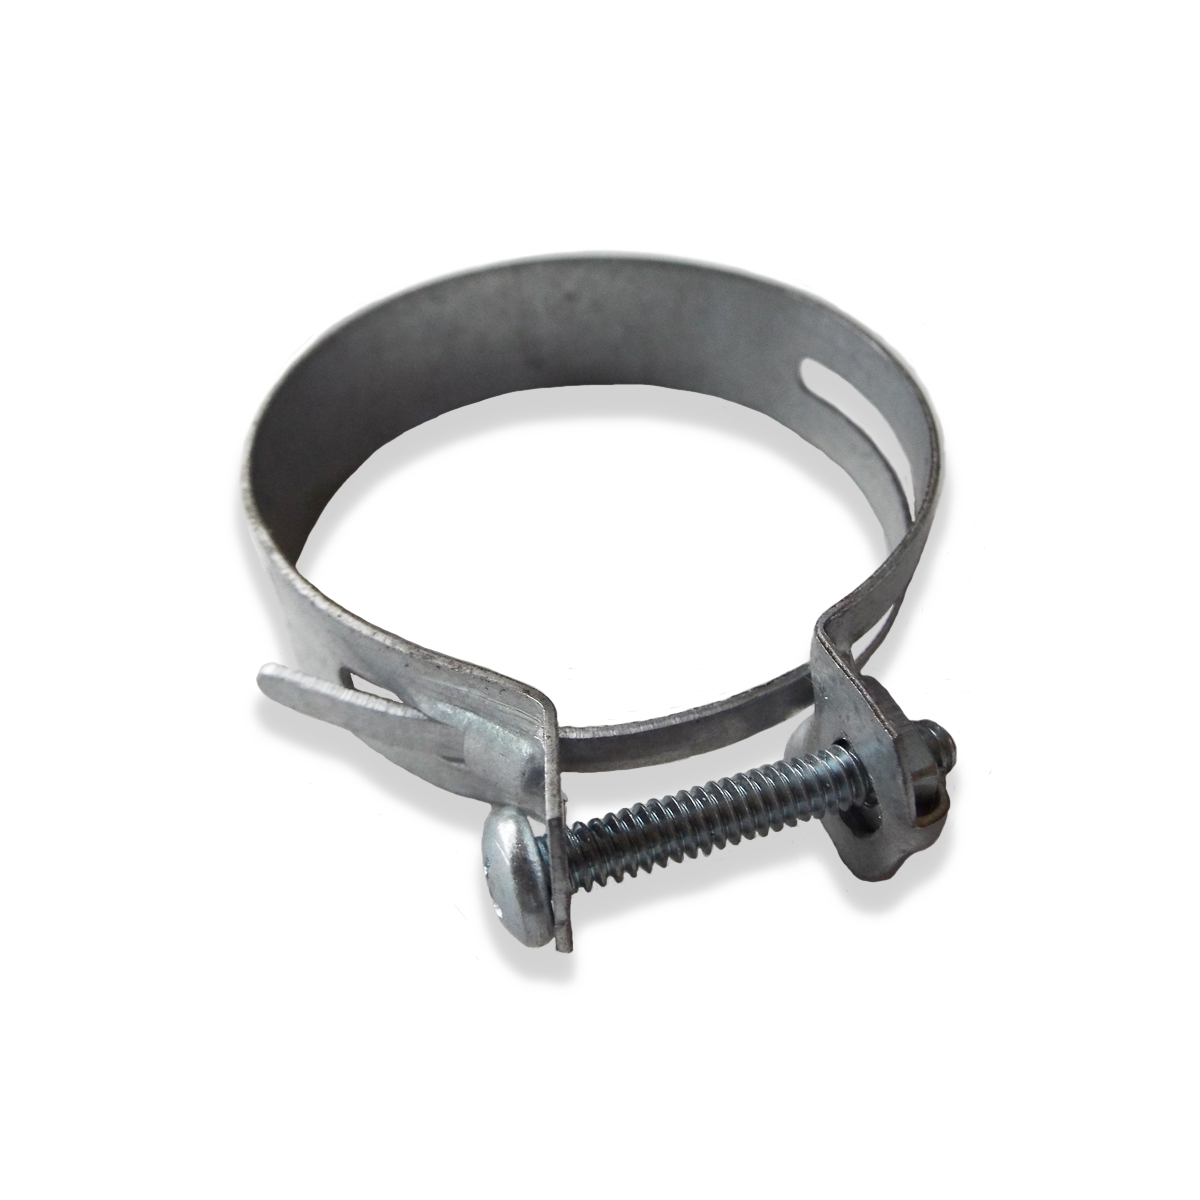 Radiator Hose Clamp Lower 235 Engine and V-8 Close to Type Used by GMC Pickup and Big Truck